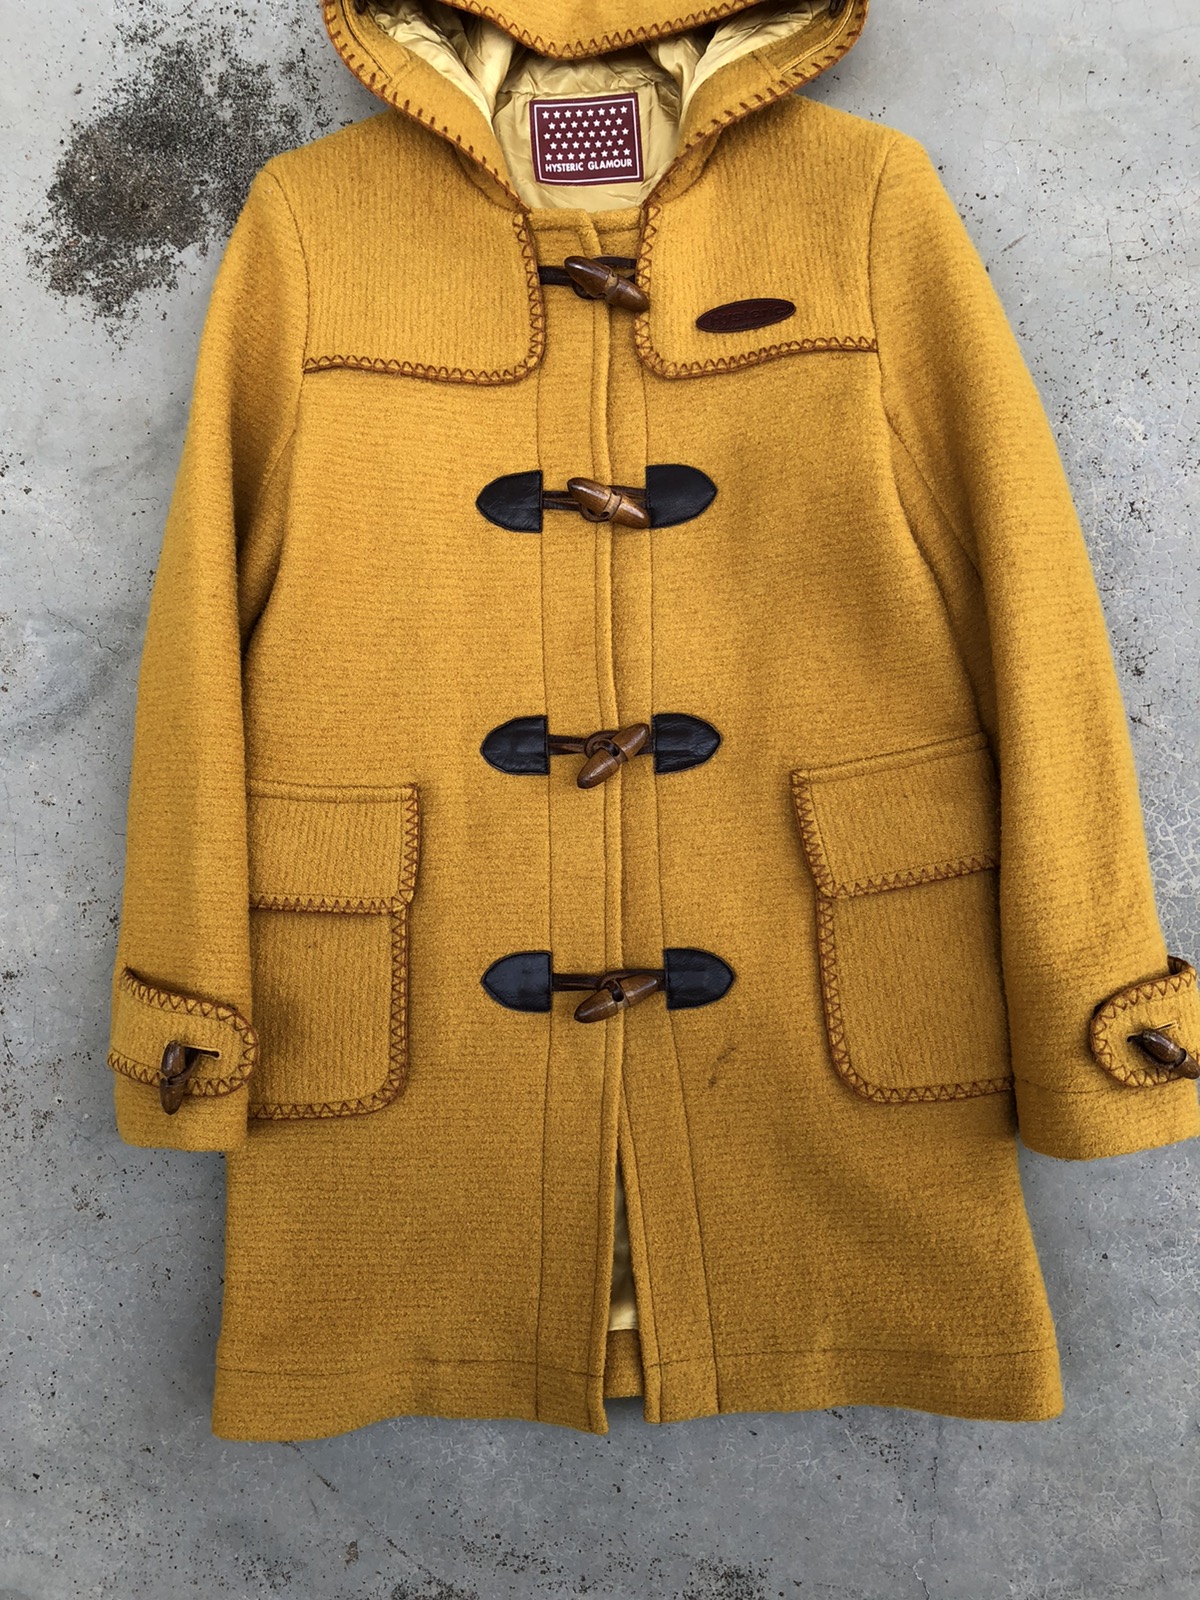 🔥HYSTERIC GLAMOUR DUFFEL COAT MADE IN JAPAN - 6